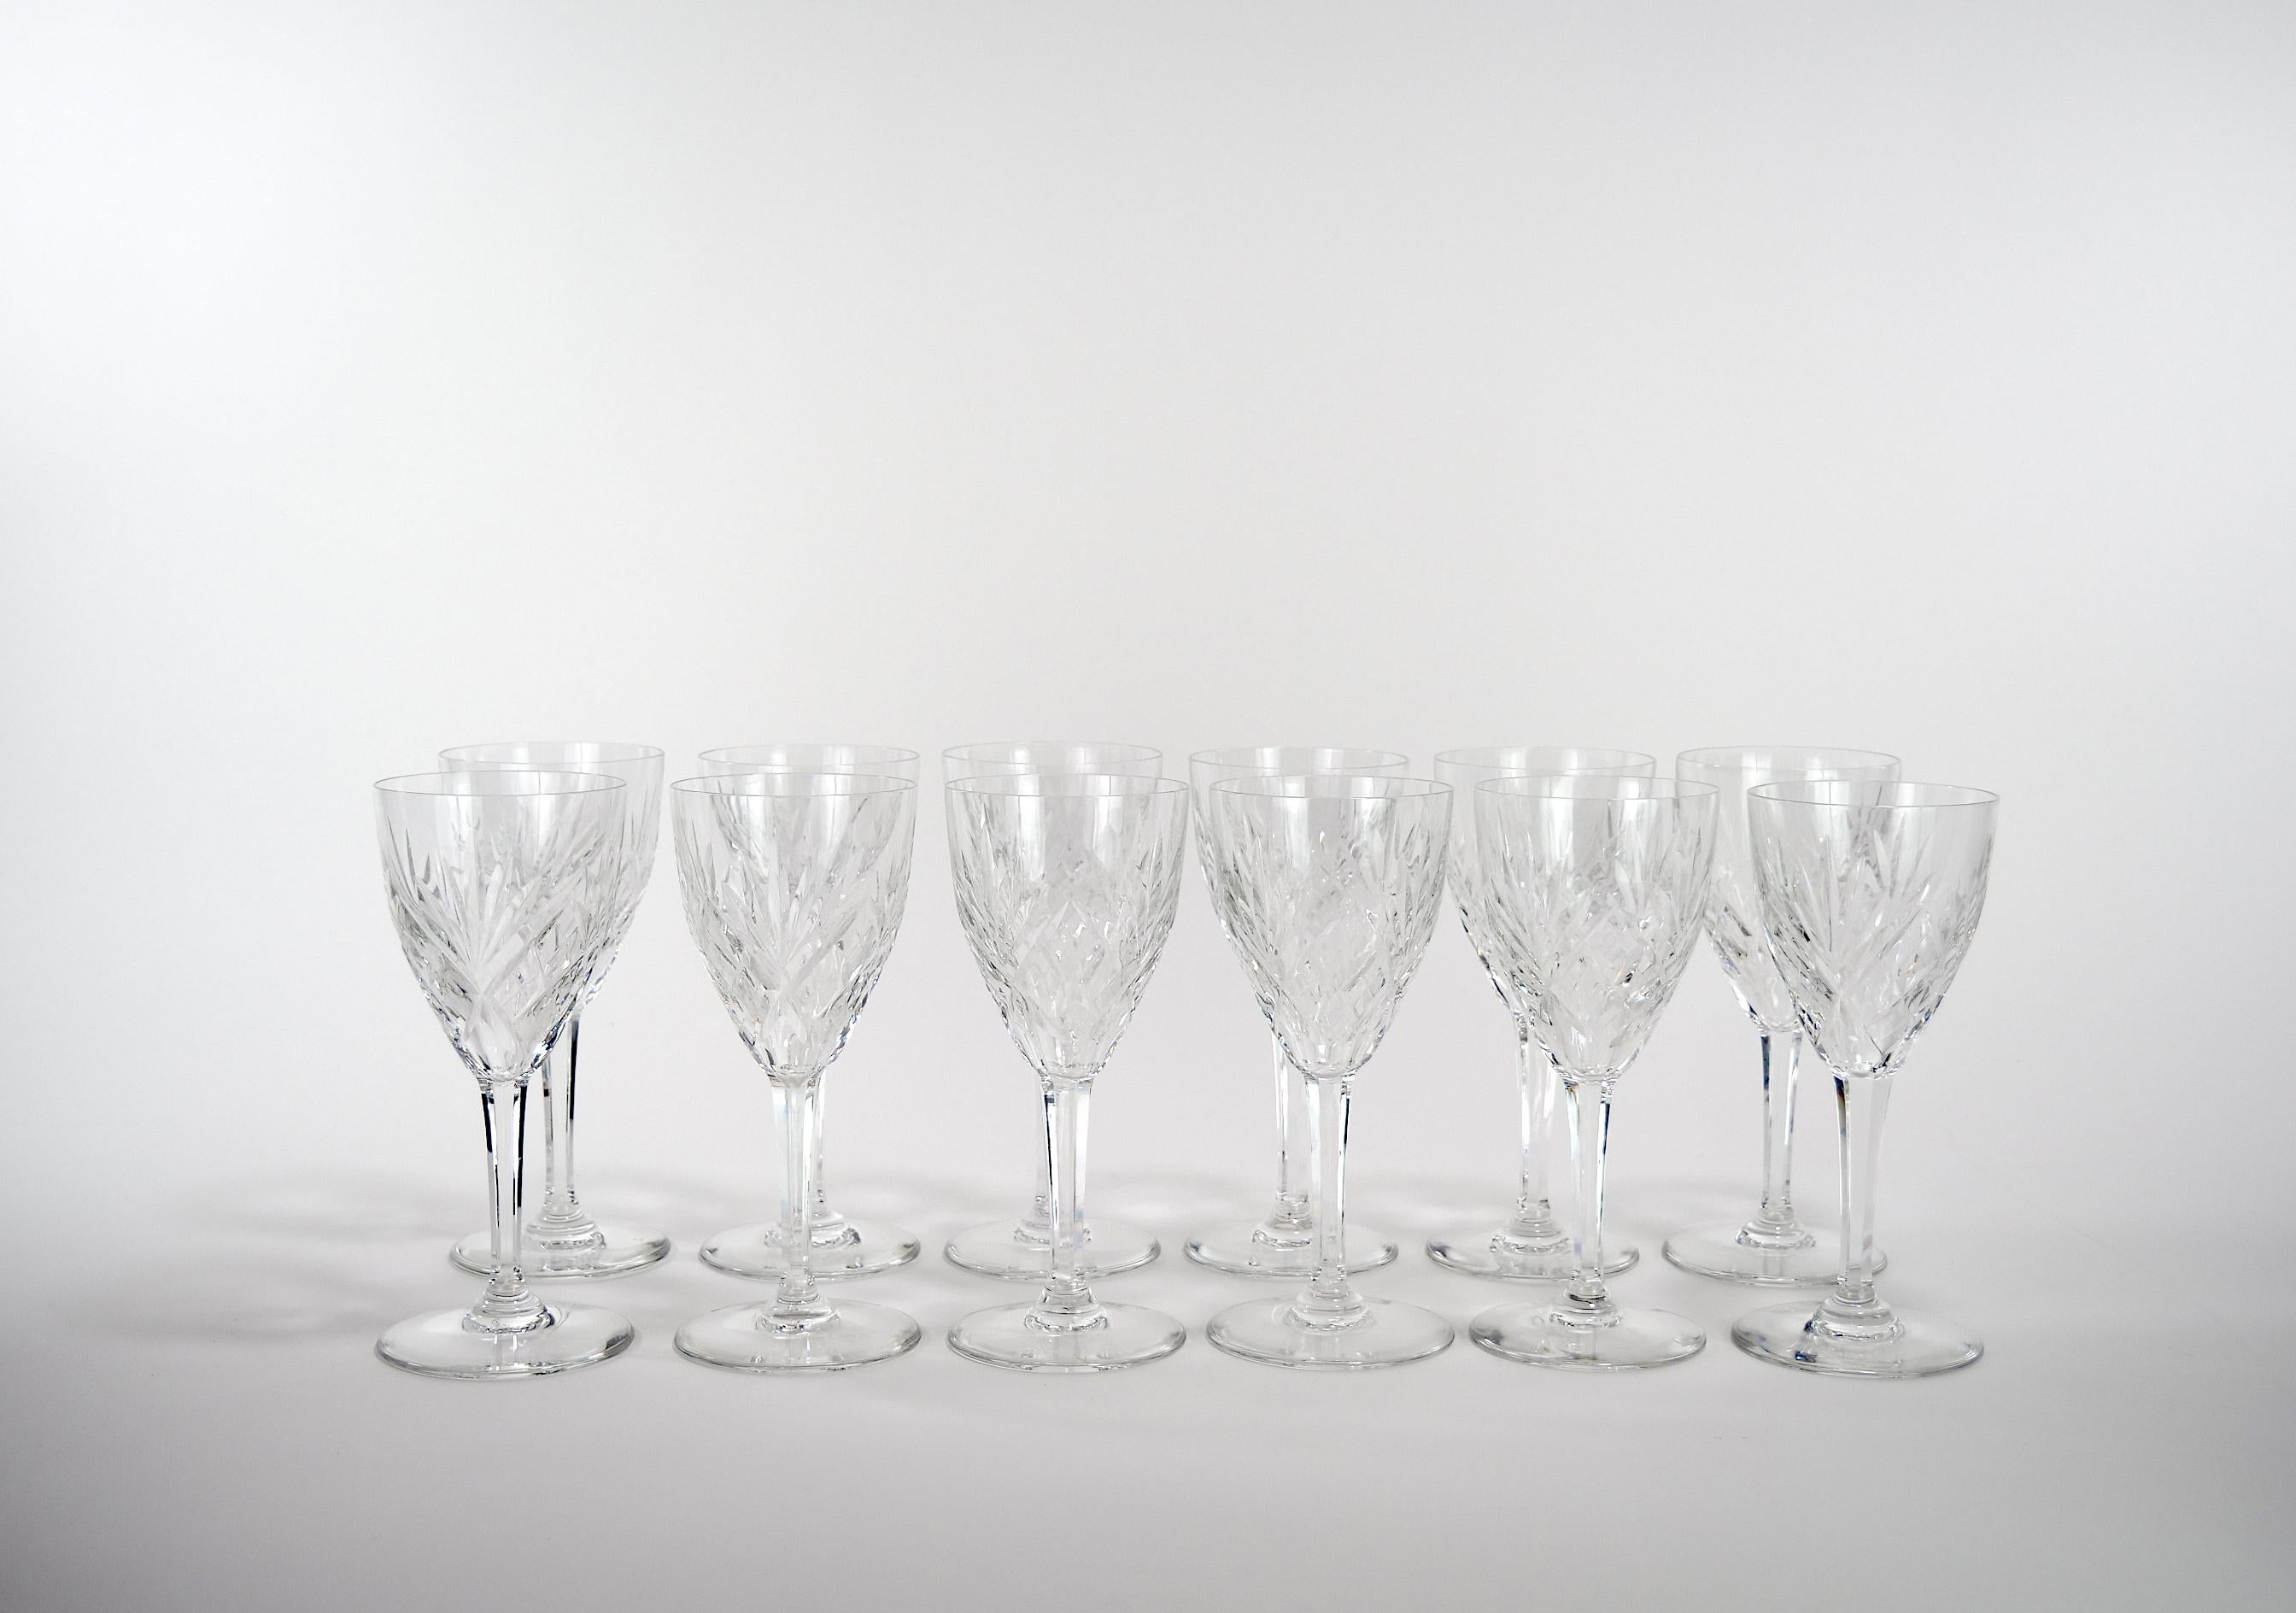 Rich and vertically cuts the faceted a bit longer than usual stem to create this elegant tapered glassware design. The deep cuts allow the light to retract and shine to a brilliant finish from any angle. Mouth blown and hand cut by France's oldest